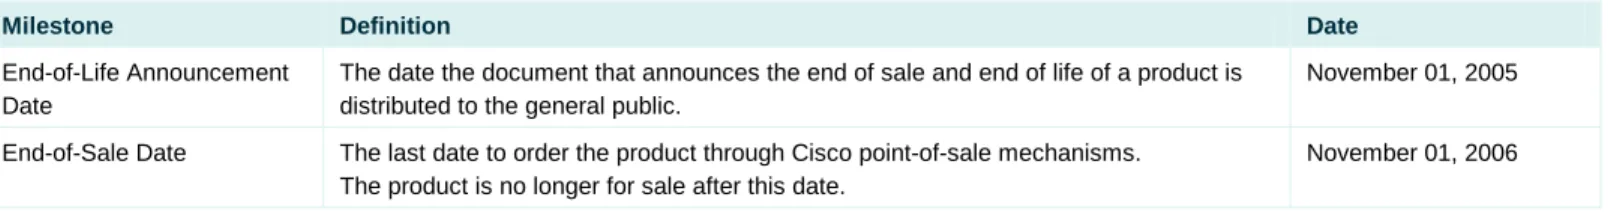 Table 1.  End-of-Life Milestones and Dates for the selective CISCO ®  Catalyst 6500 Chassis and Low Speed Fan Modules 